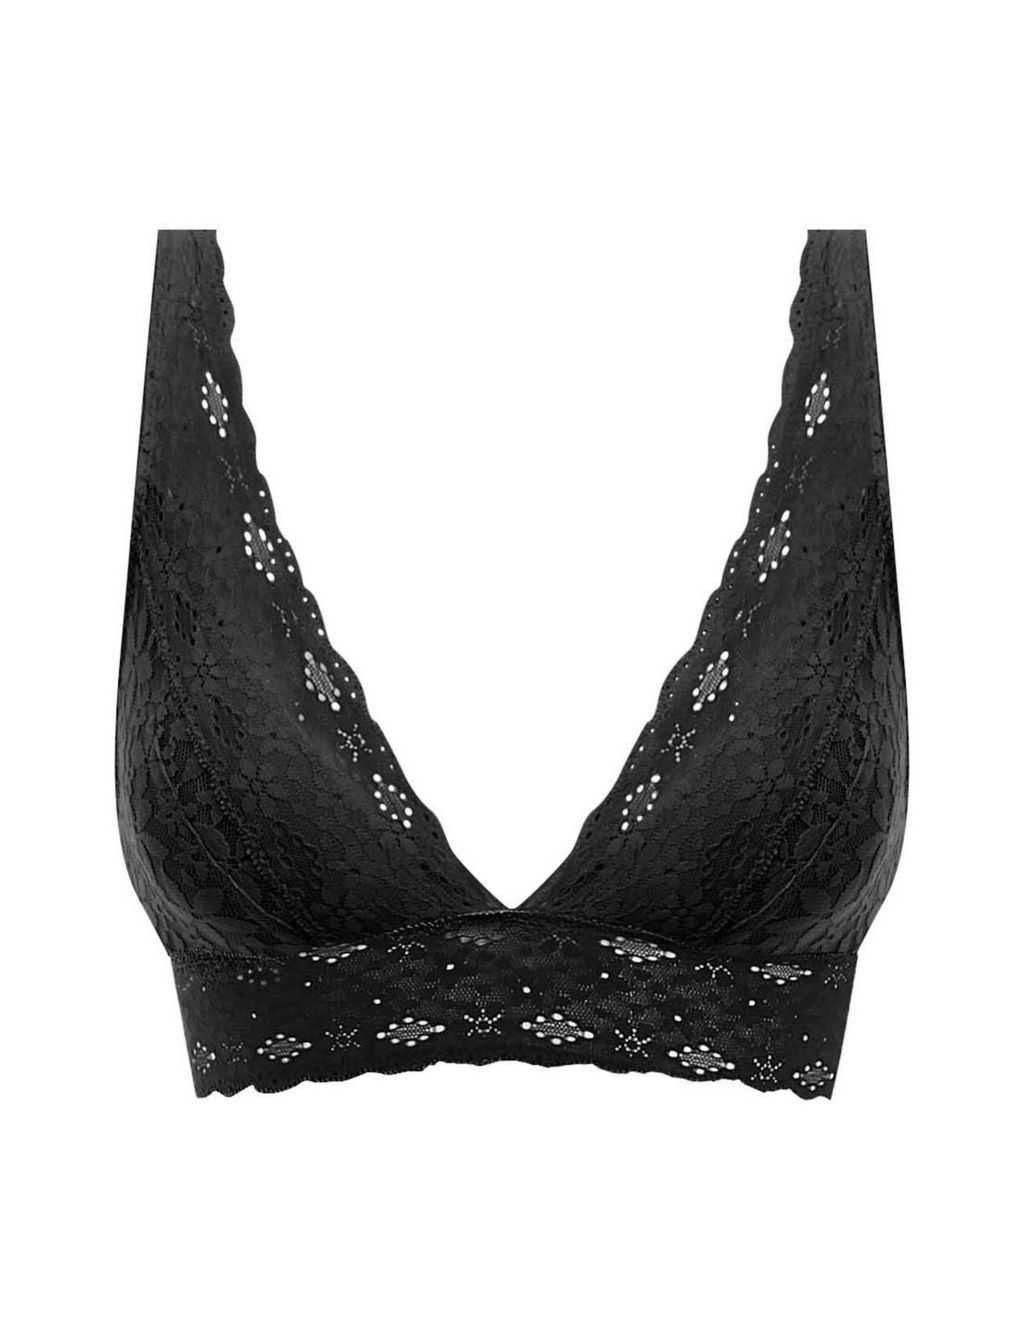 Halo Floral Lace Non Wired Plunge Bra, Wacoal